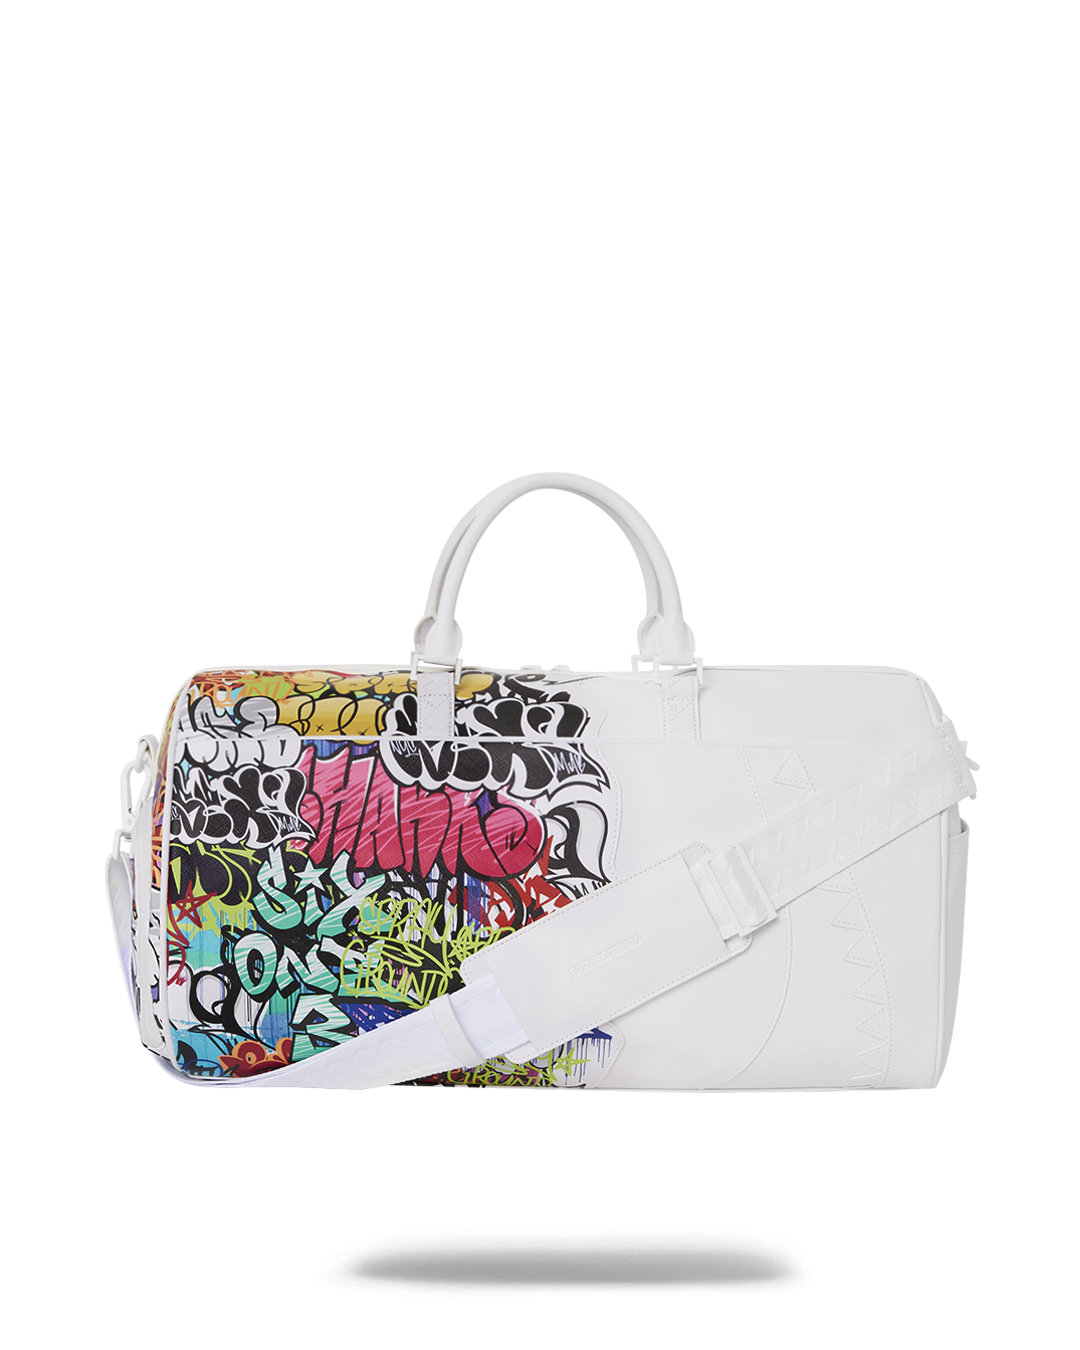 A PAIR OF LIMITED EDITION GRAFFITI MONOGRAM CANVAS HARDSIDED